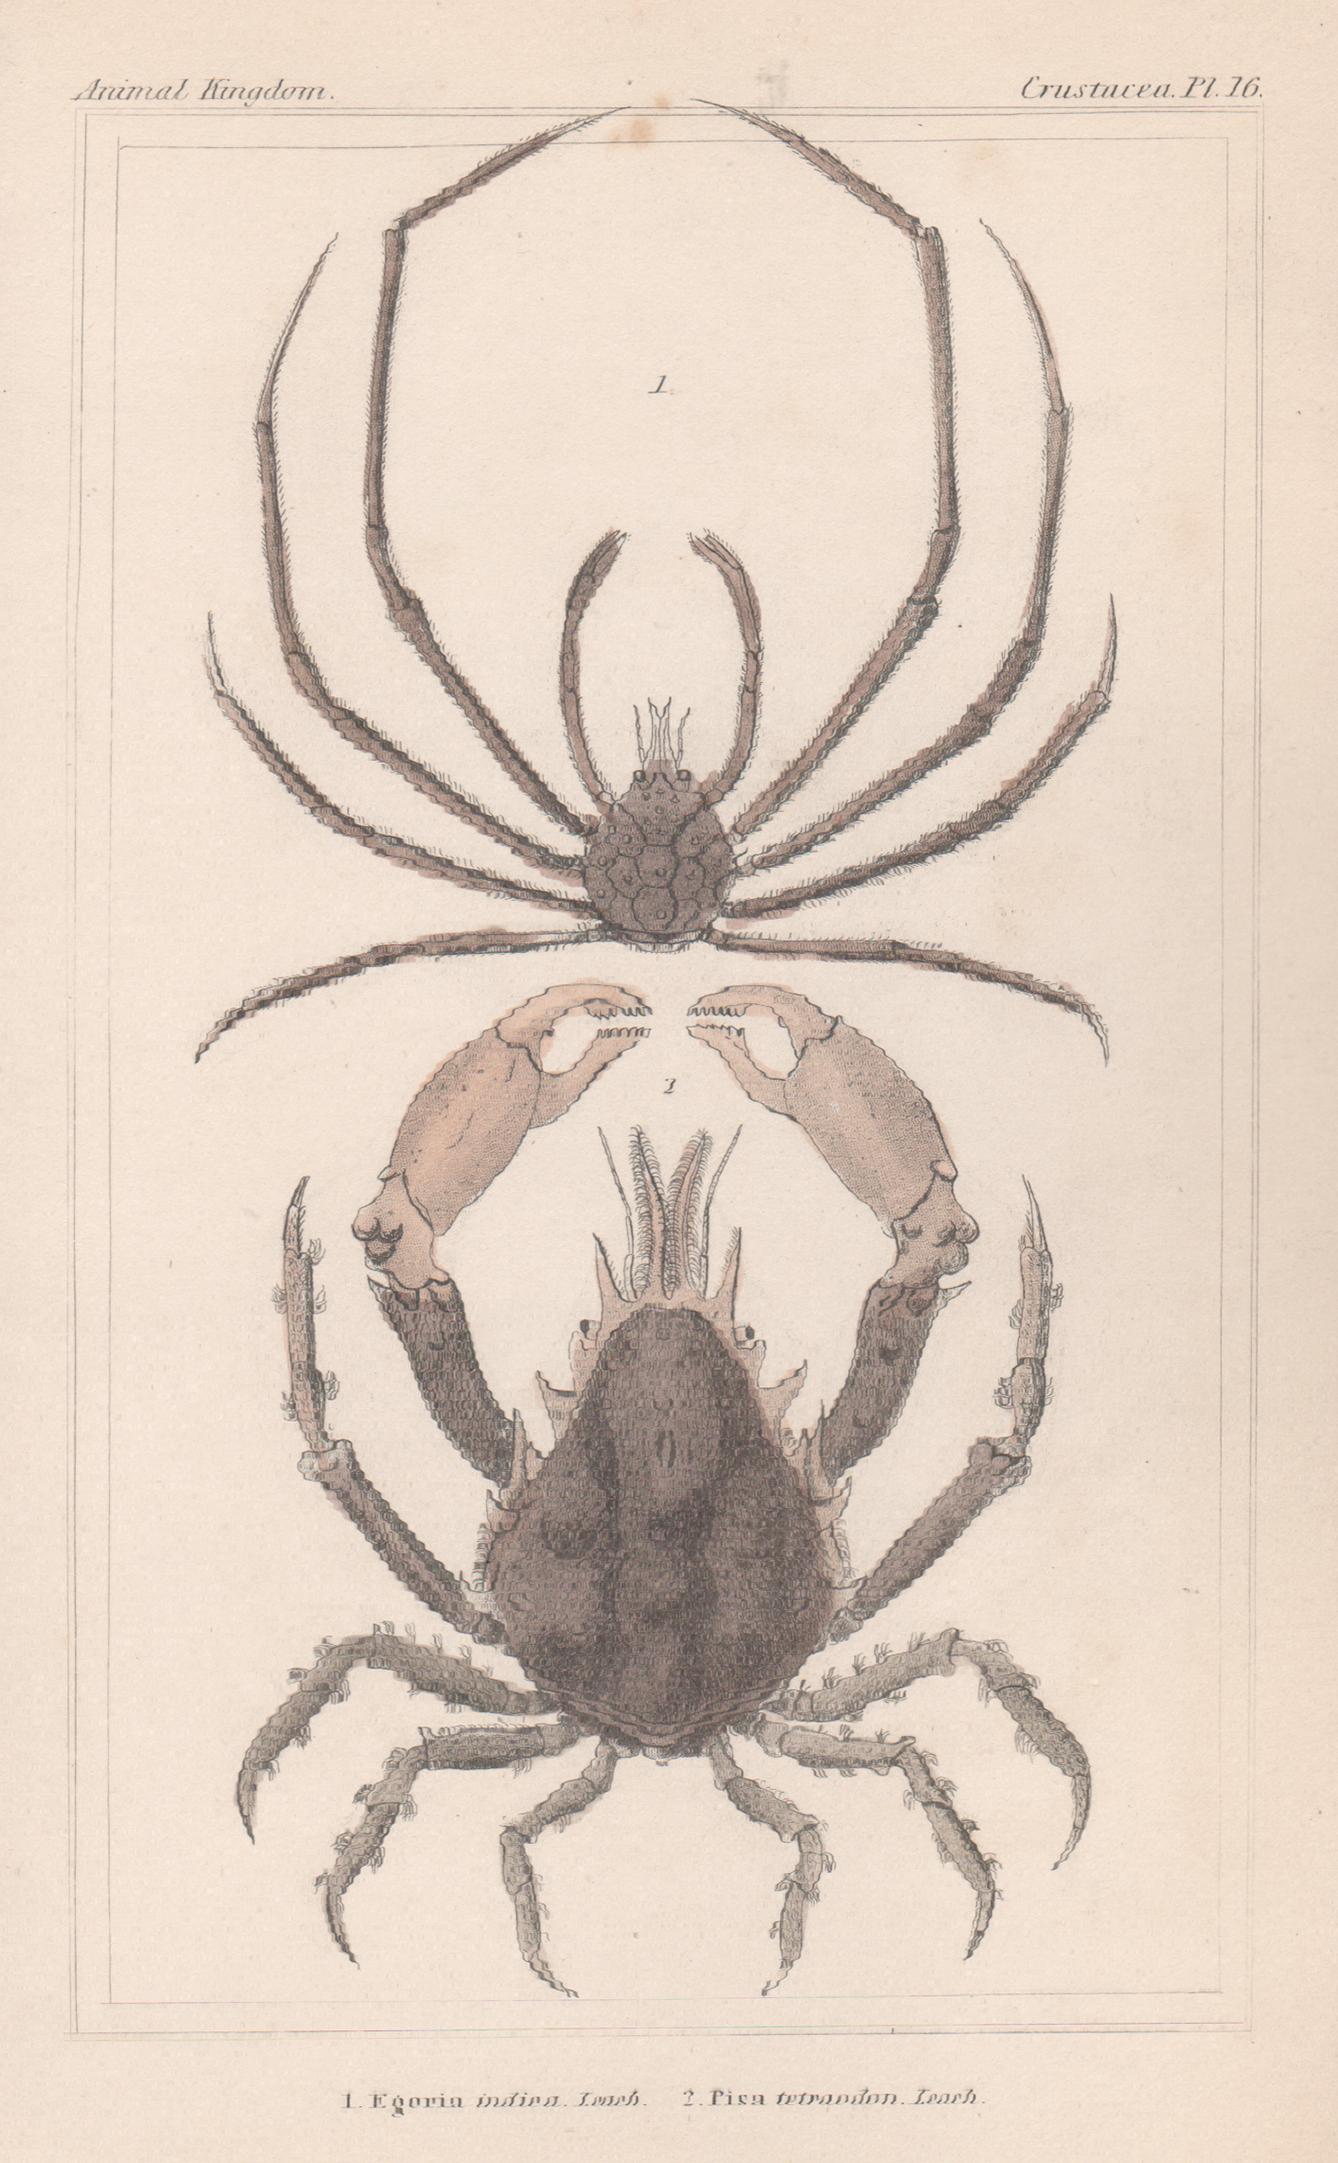 Unknown Animal Print - Crustaceans - crabs, antique English natural history engraving print, 1837